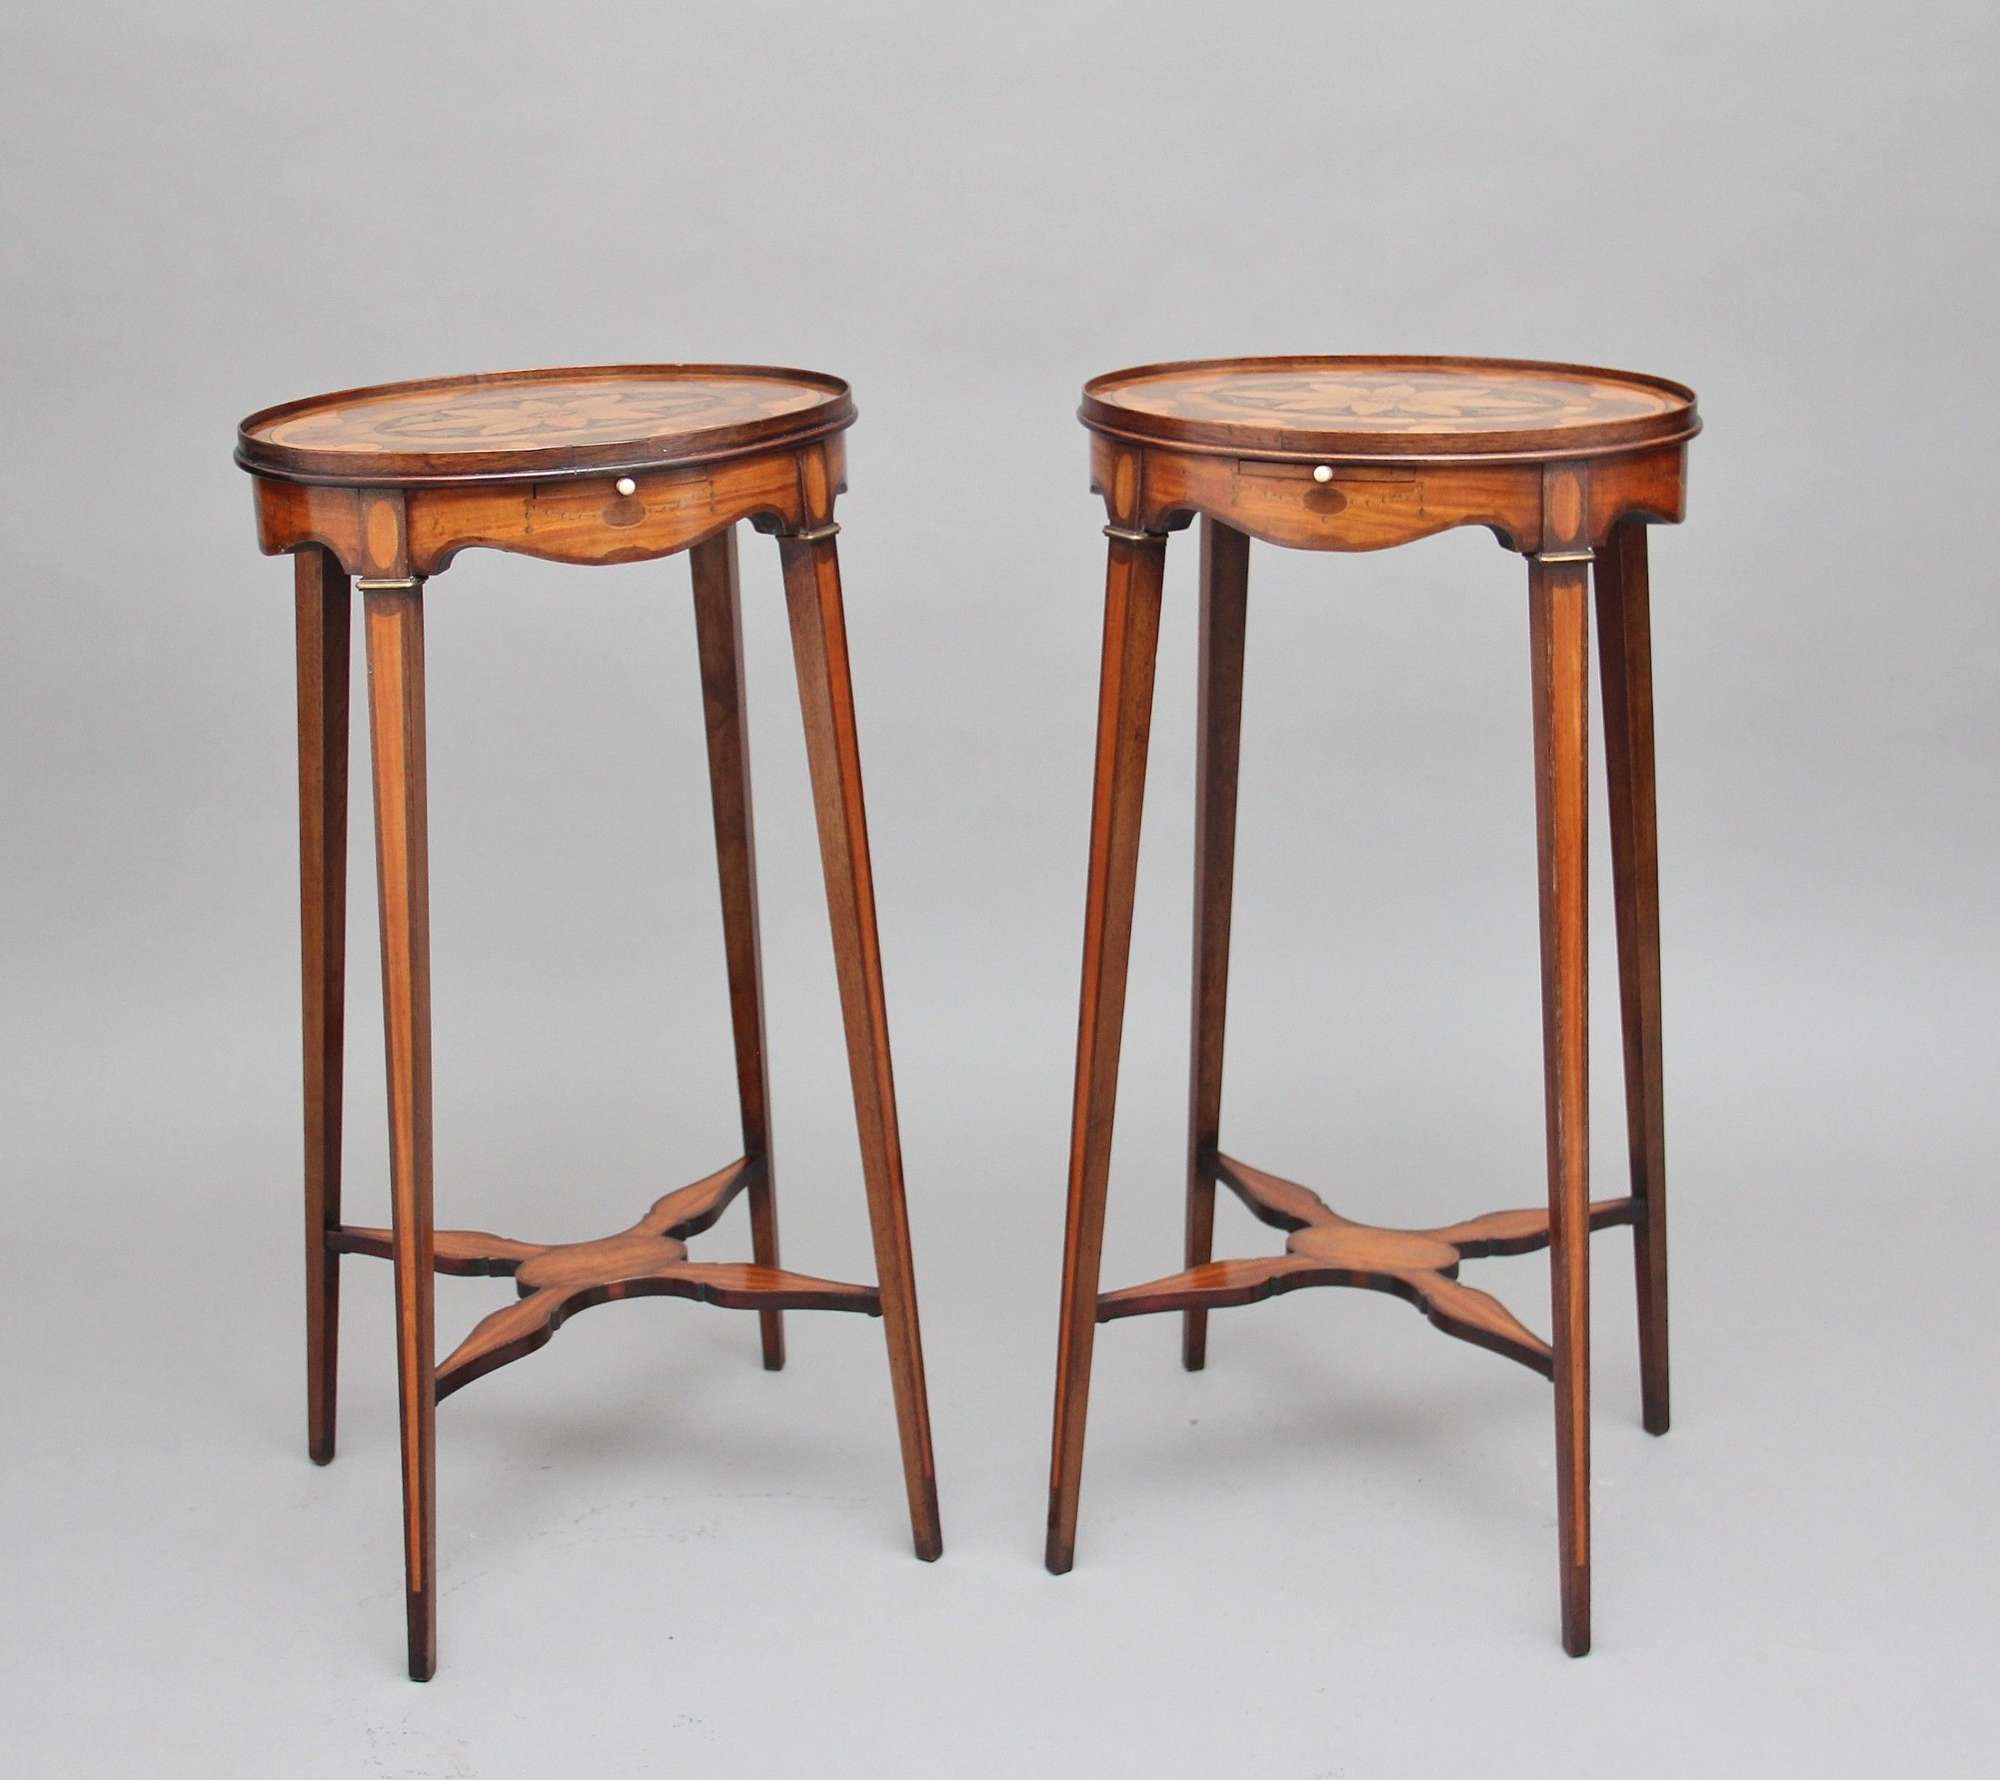 Pair Of Sheraton Revival Mahogany And Inlaid Urn Stands